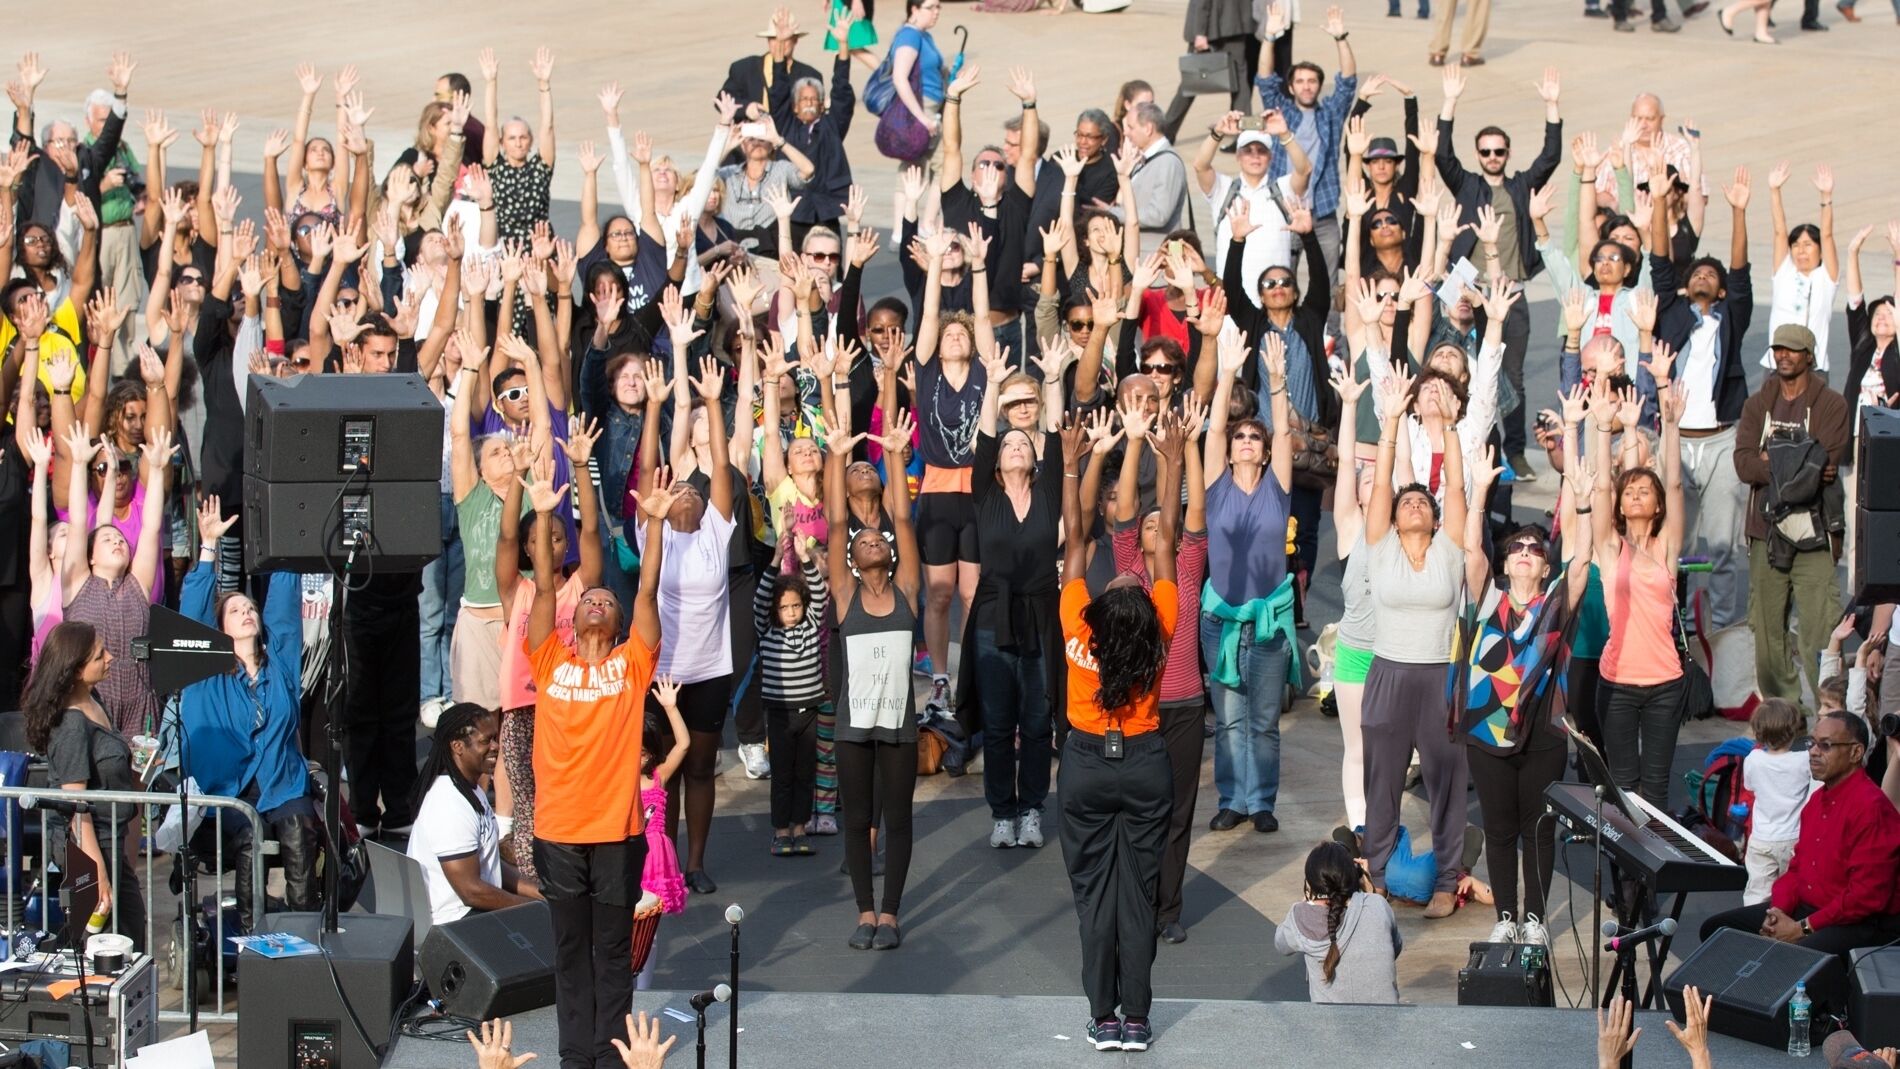 A large group of people stand with their arms raised in unison during an outdoor event, with a few individuals in orange shirts leading the activity.